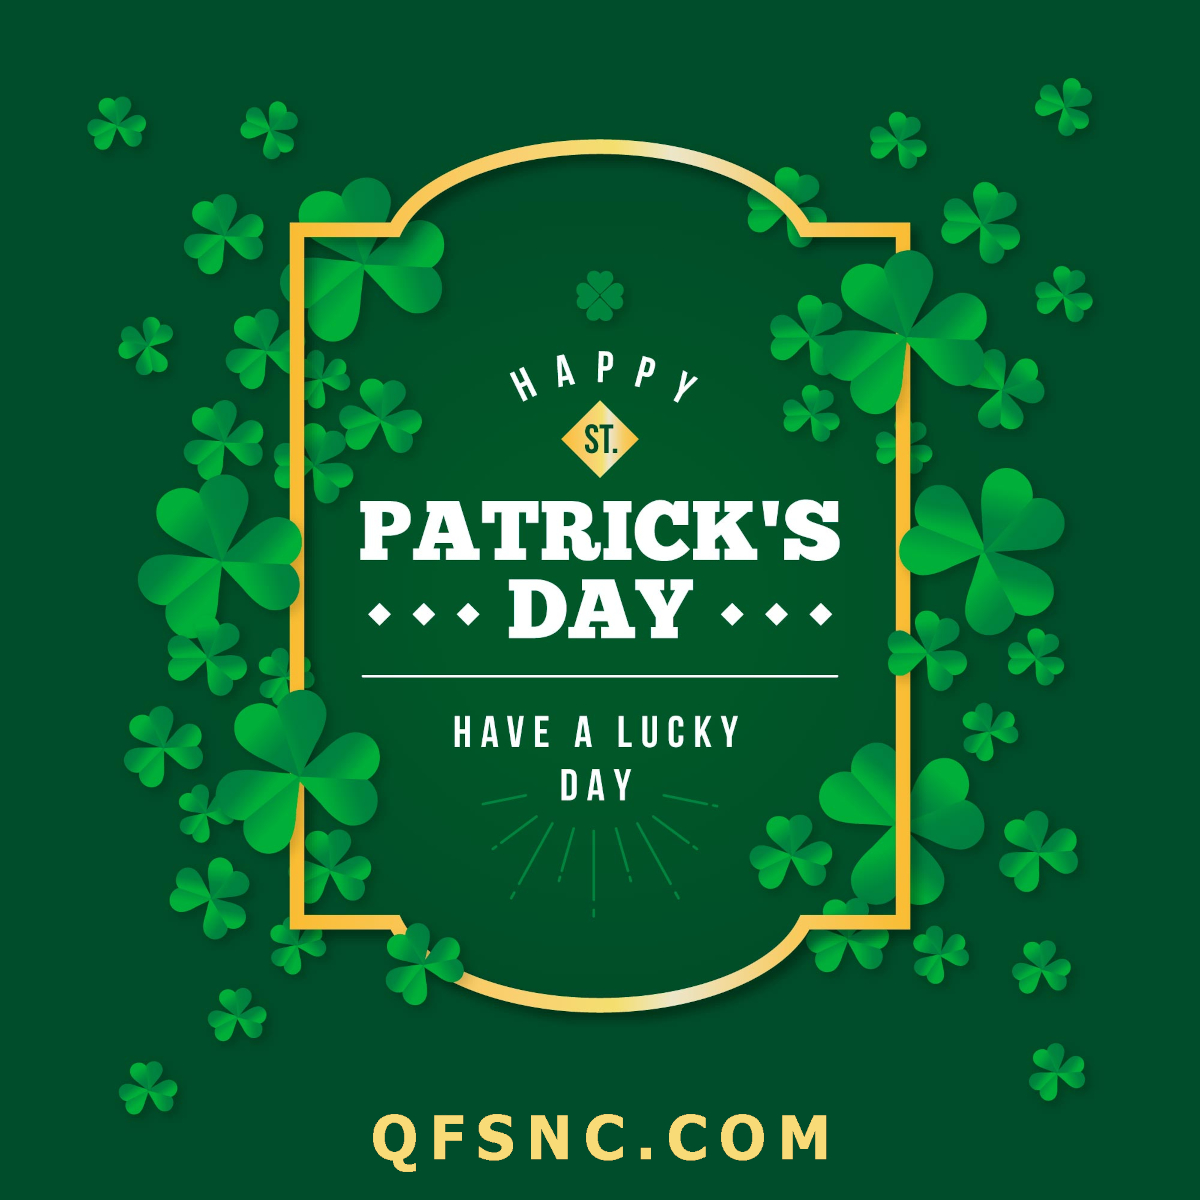 Happy St. Patrick's Day. Have a lucky day, 😊😊😊😊😊😊😊😊😊😊 The Team At Quality Family Services #CharlotteNC #NorthCarolina